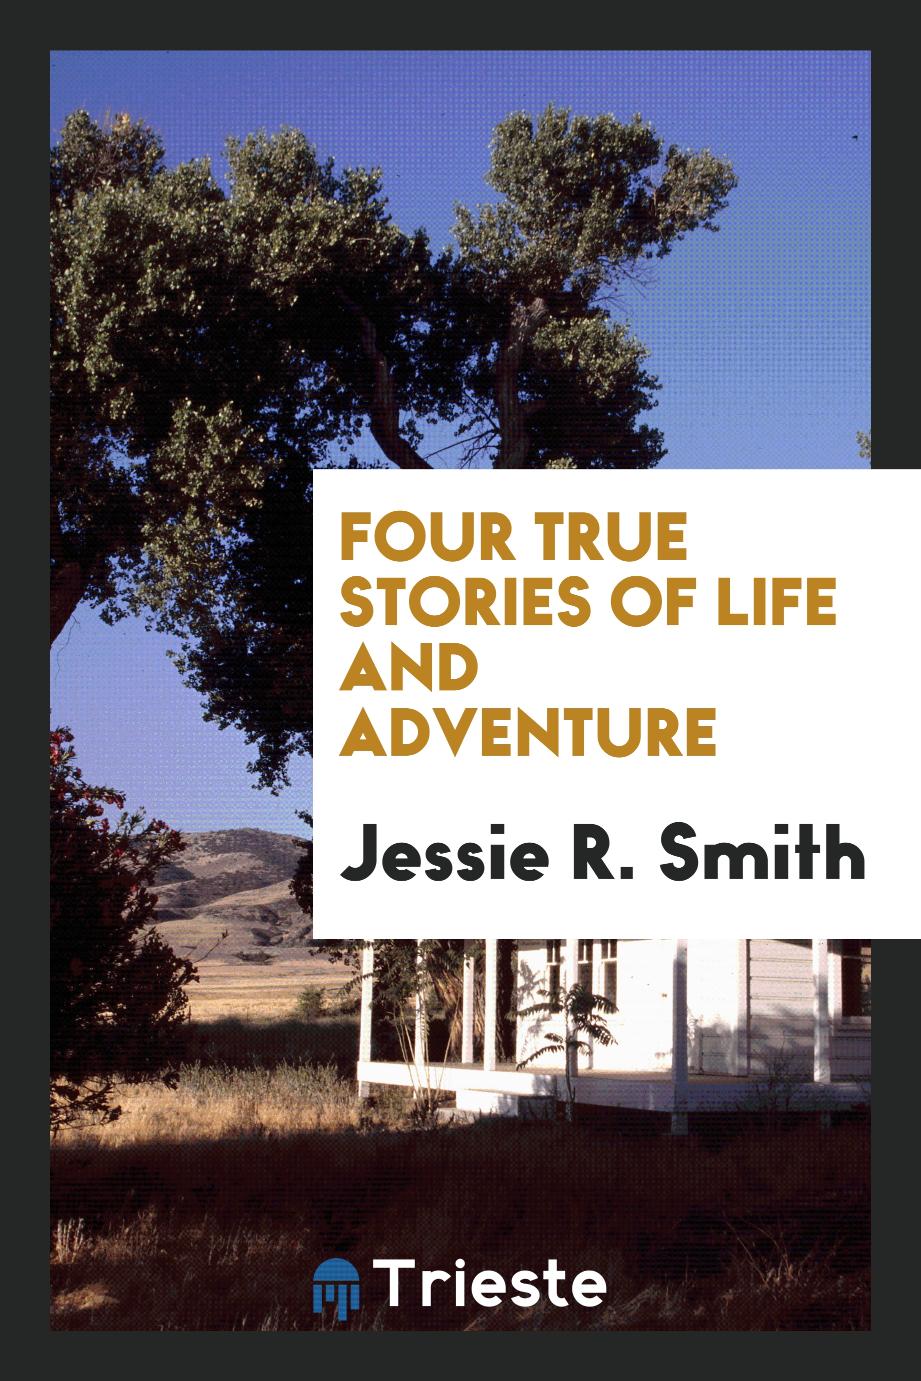 Four True Stories of Life and Adventure